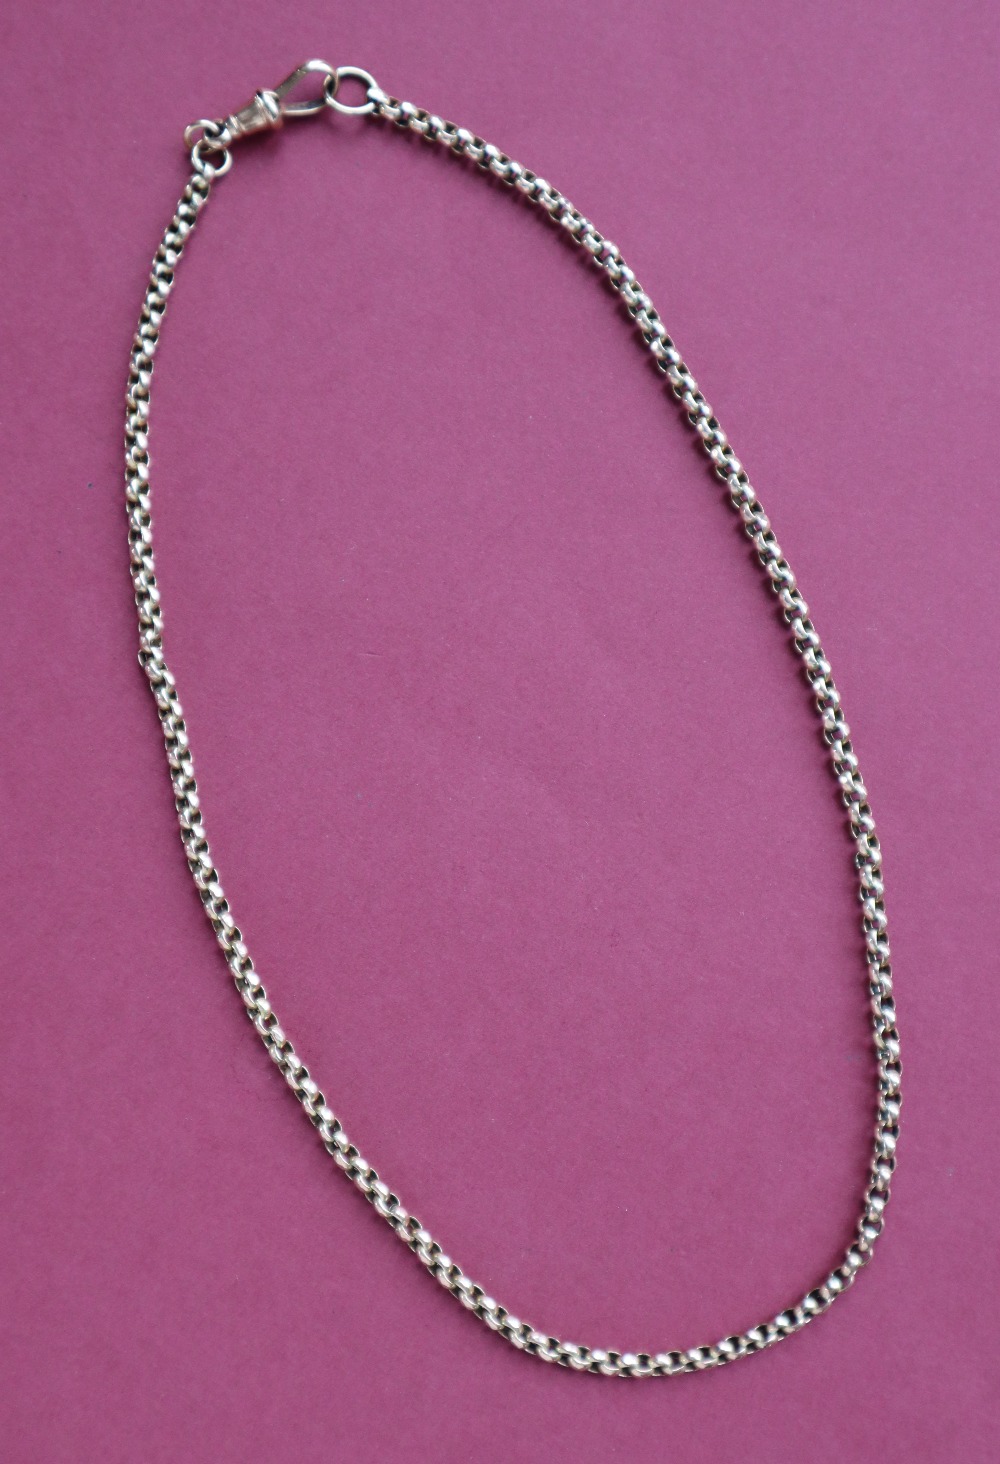 A 9ct yellow gold necklace with textured circular links and a lobster clasp, 41cm long, - Image 2 of 2